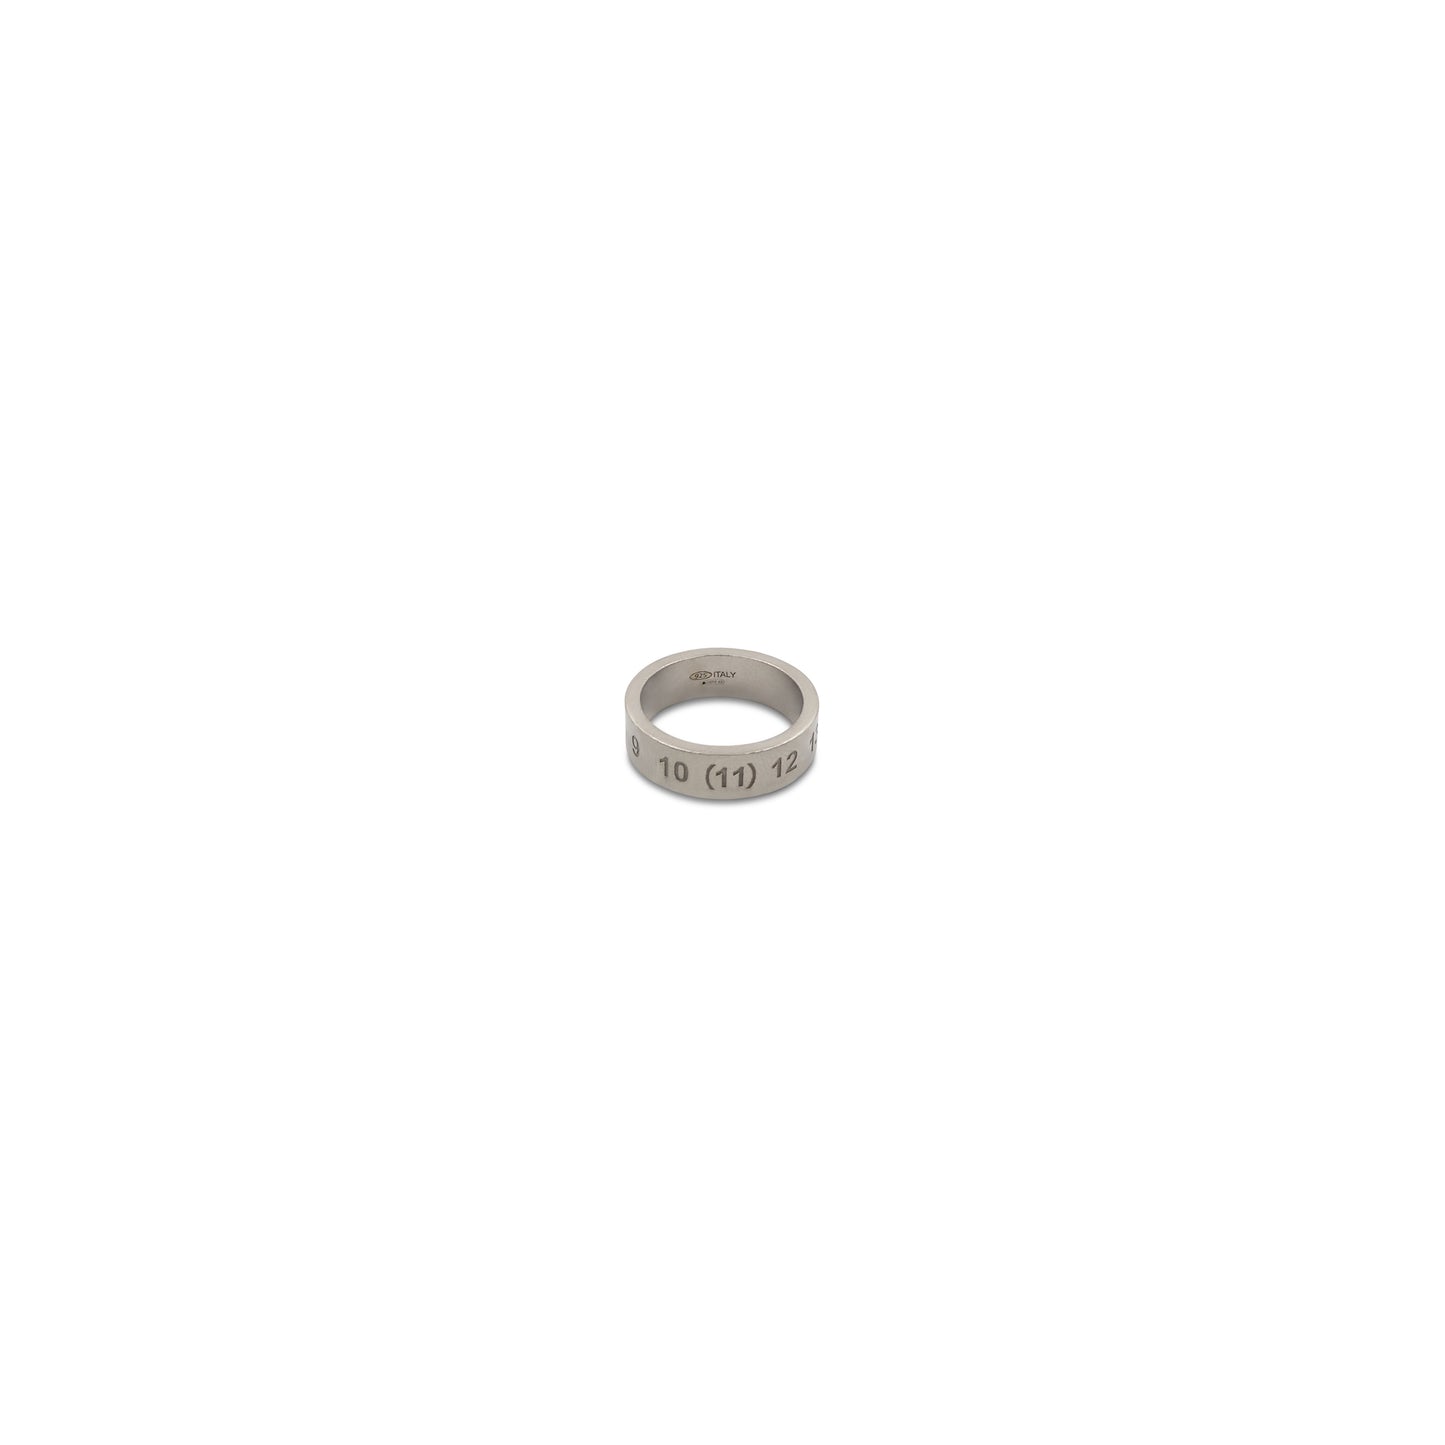 Engraved Numbers Band Ring in Silver